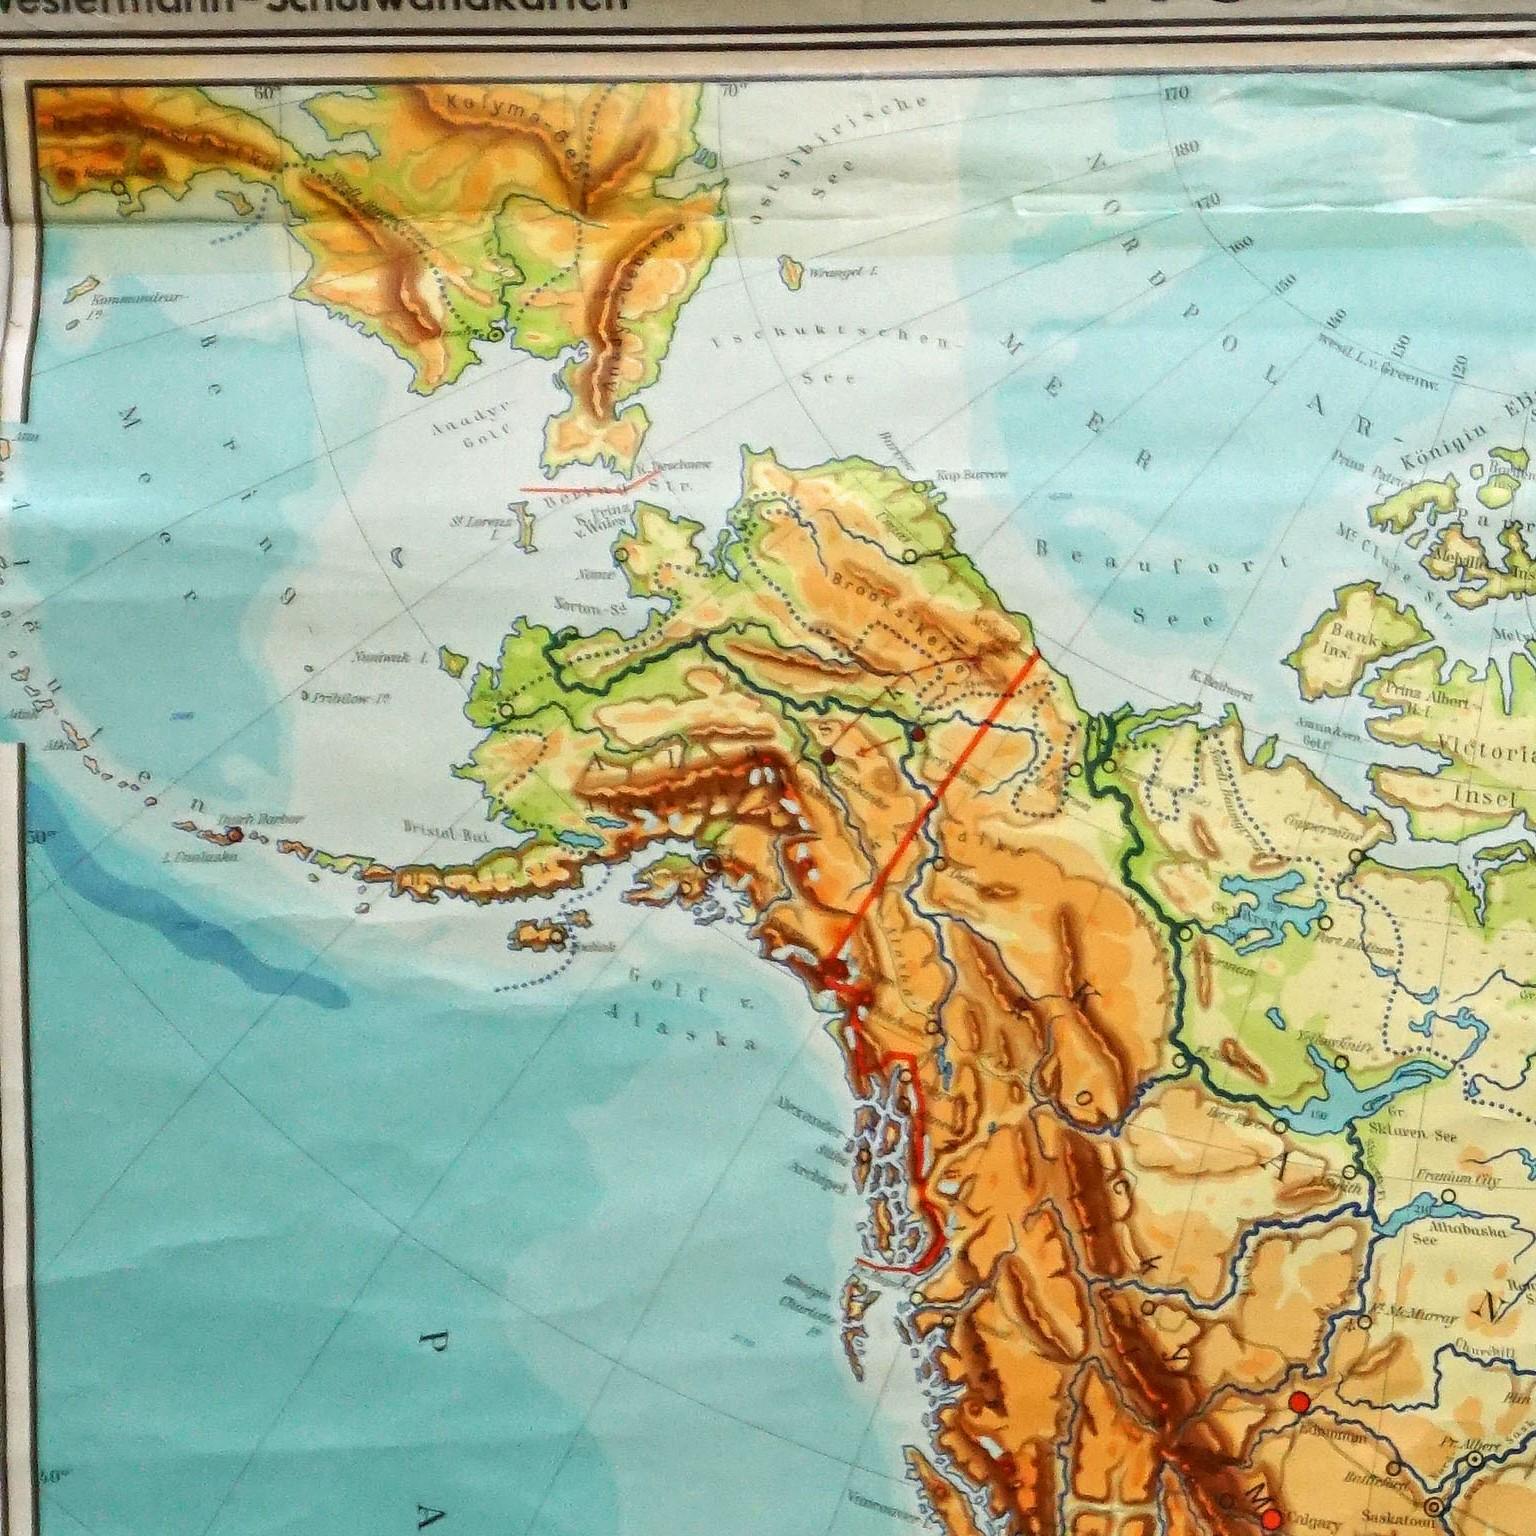 A traditional vintage pull-down school map illustrating North America, published by Westermann. Colorful print on paper reinforced with canvas. 
Measurements:
Width 156 cm (61.42 inch)
Height 169 cm (66.54 inch)

The measurements shown refer just to